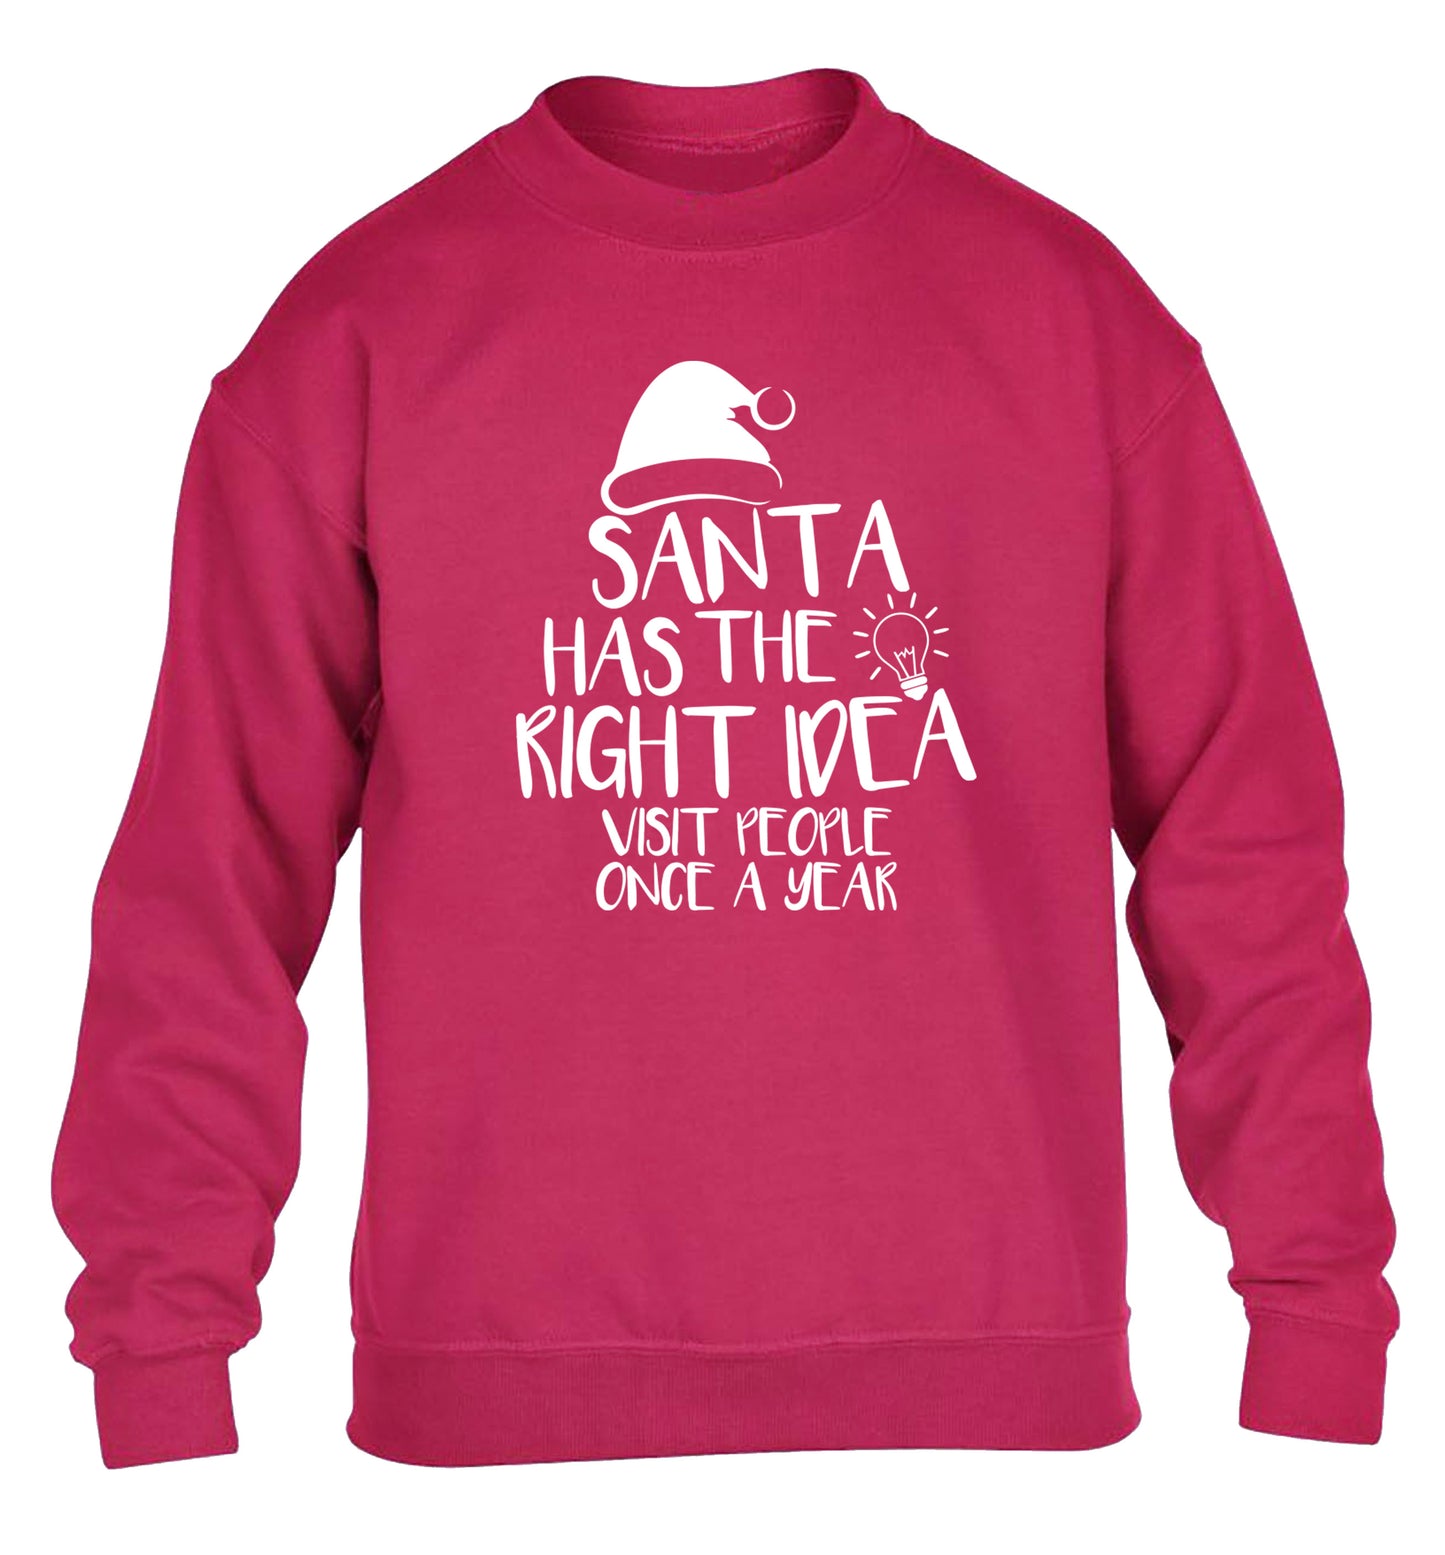 Santa has the right idea visit people once a year children's pink sweater 12-14 Years